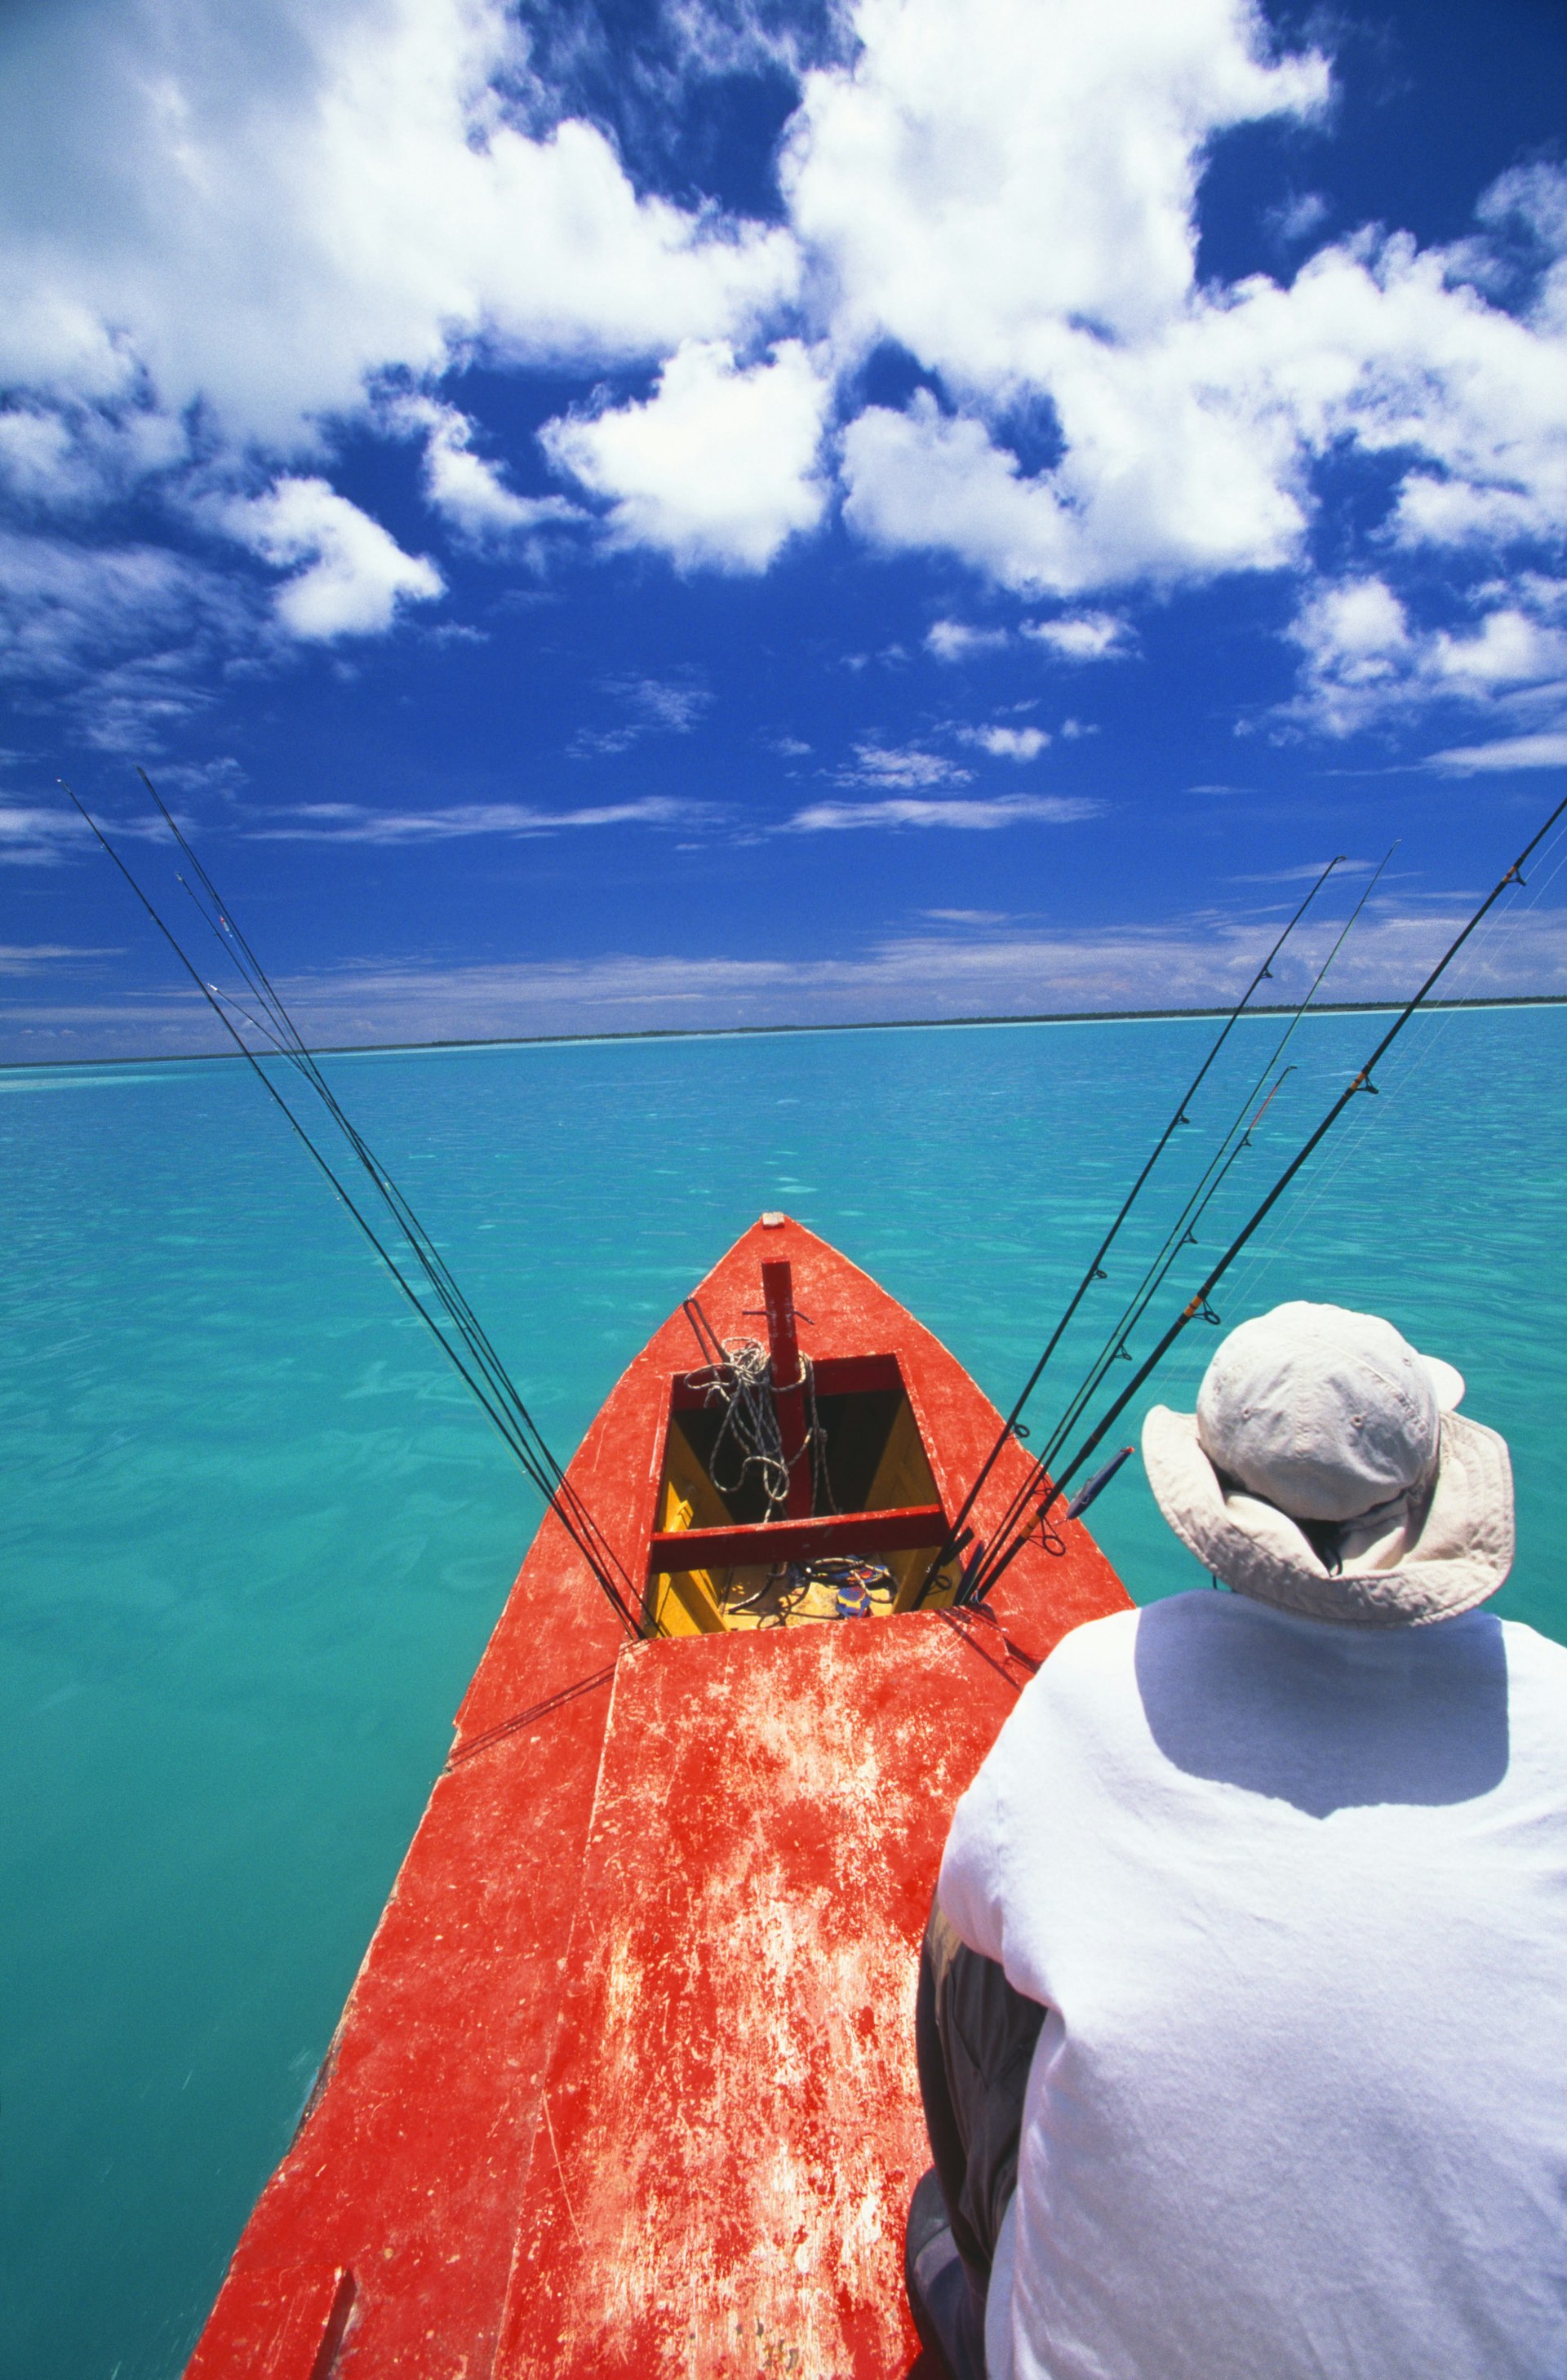 Features - Christmas Island, bone fishing from a red boat, man sits in front.